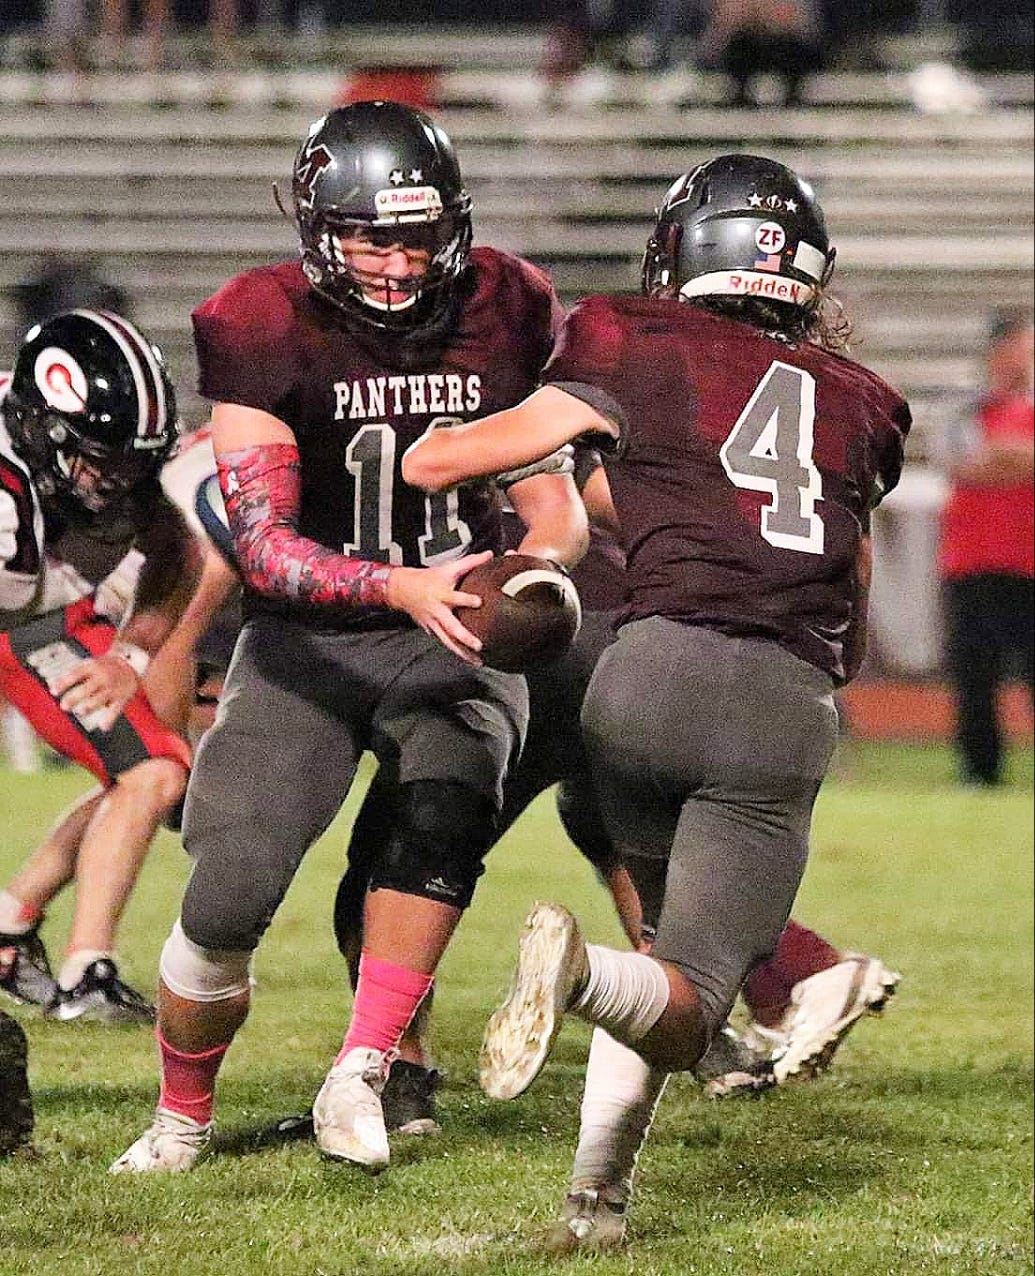 Merryville quarterback Remington Coody (11) hands the ball off to Kaleb Lewis (4) on the razor jet sweep last week against Gueydan. The Panthers host Basile at 7 p.m. Thursday night at Keener-Cagle Stadium.